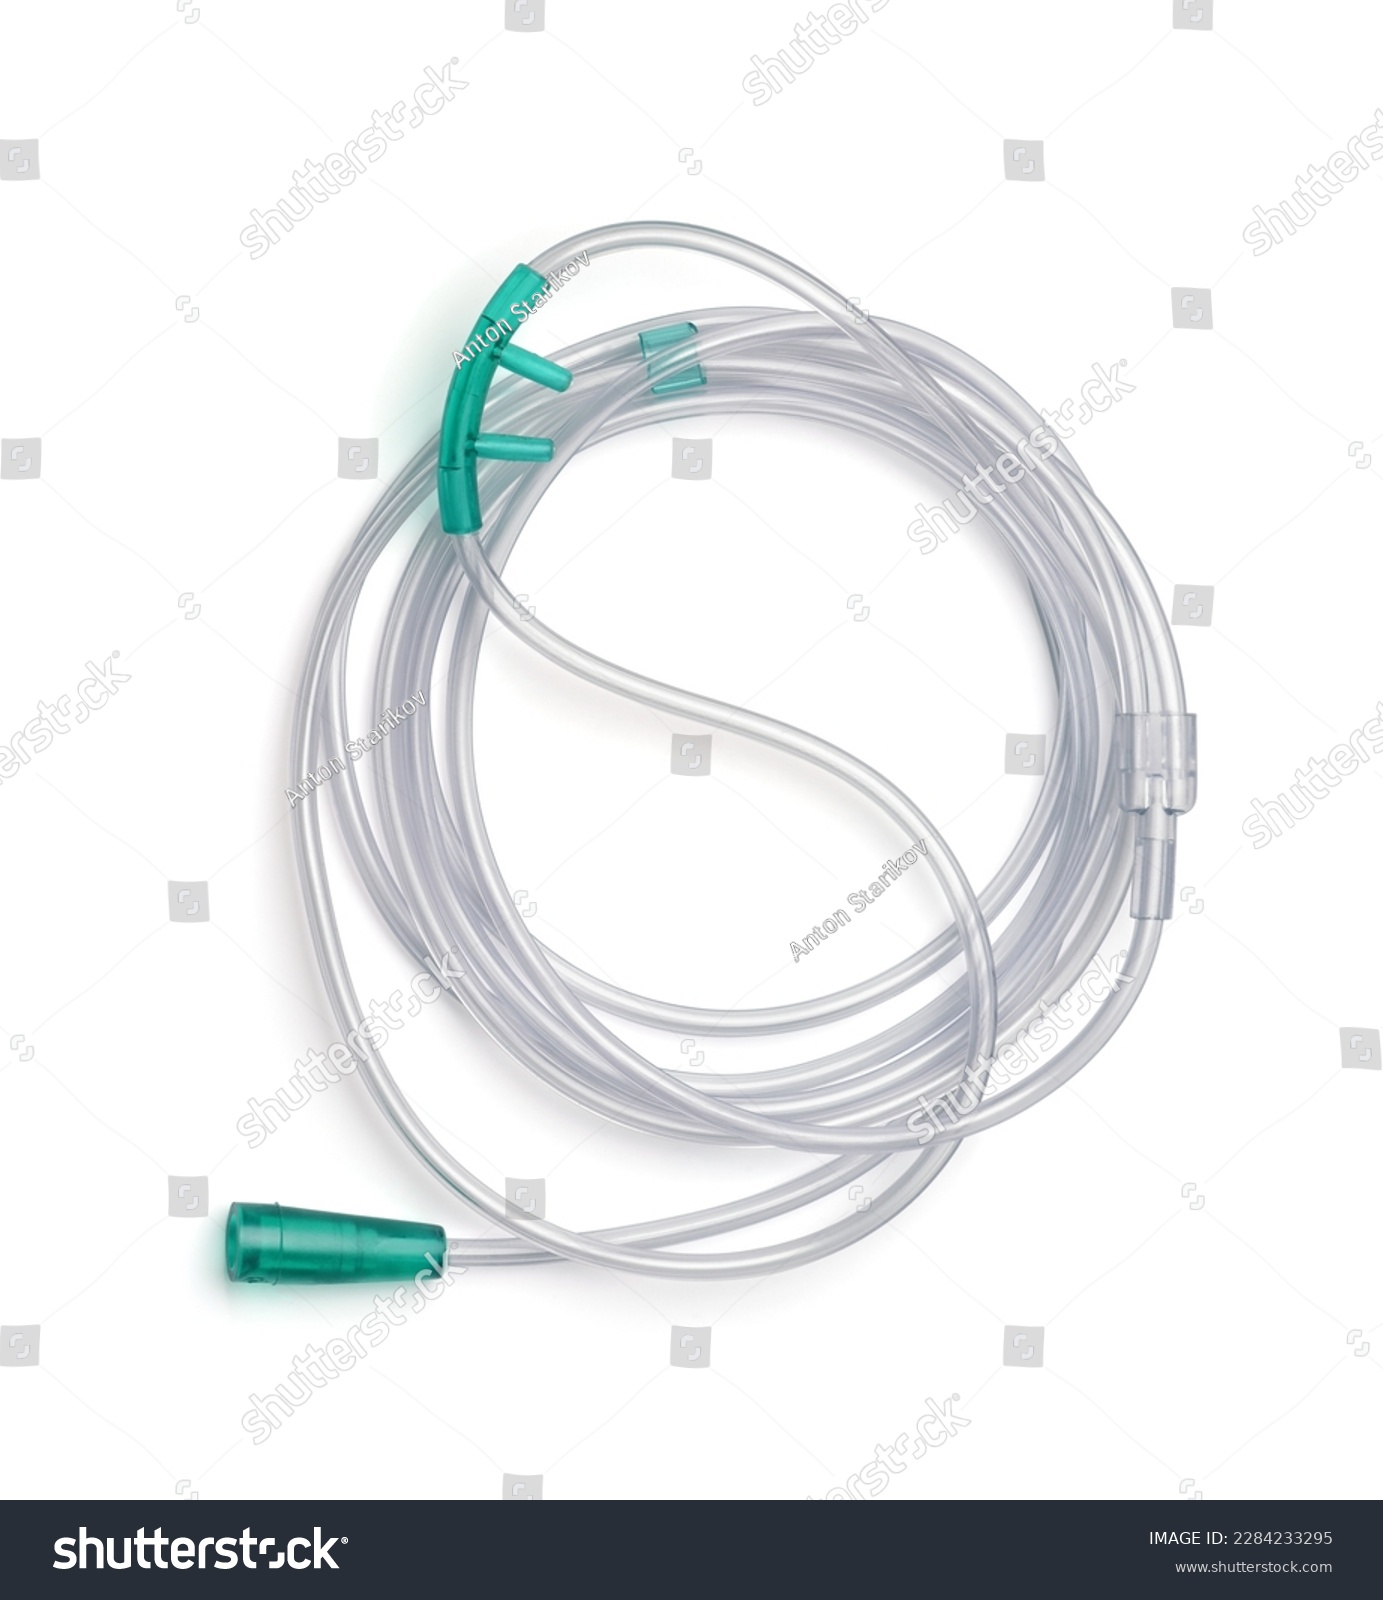 Top view of twin bore nasal oxygen breathing cannula isolated on white #2284233295